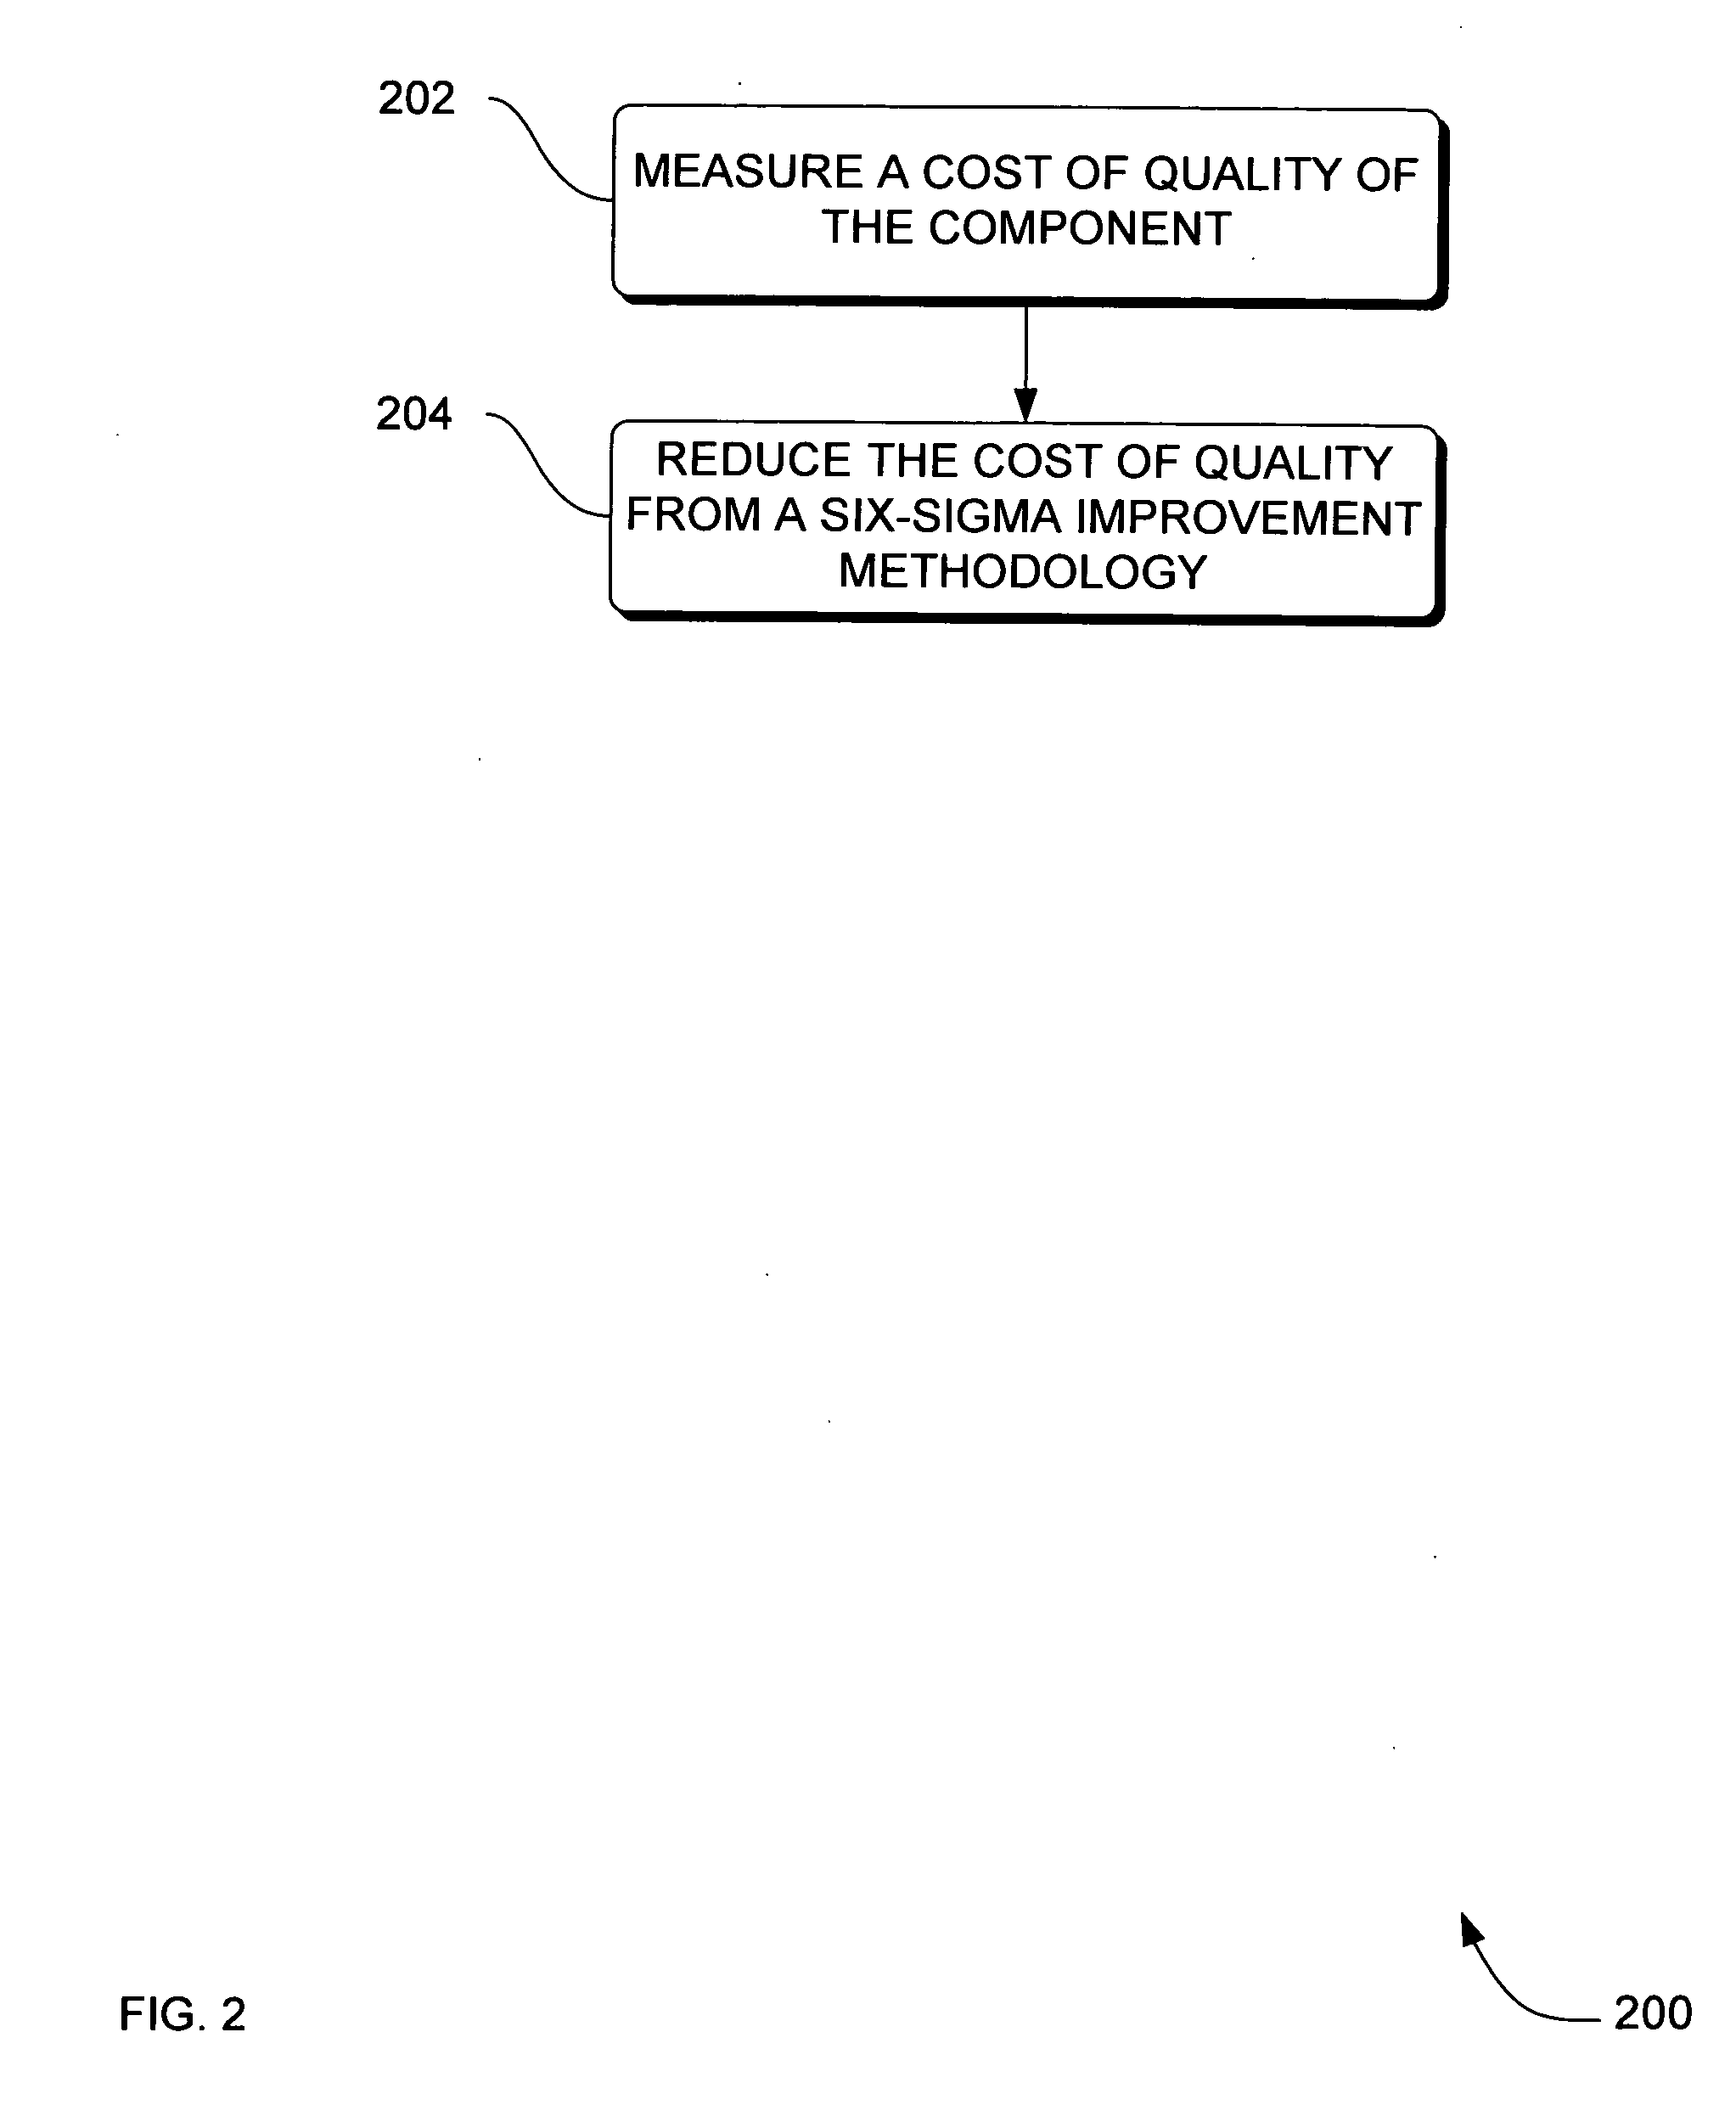 Systems, methods and apparatus for cost analysis of medical devices